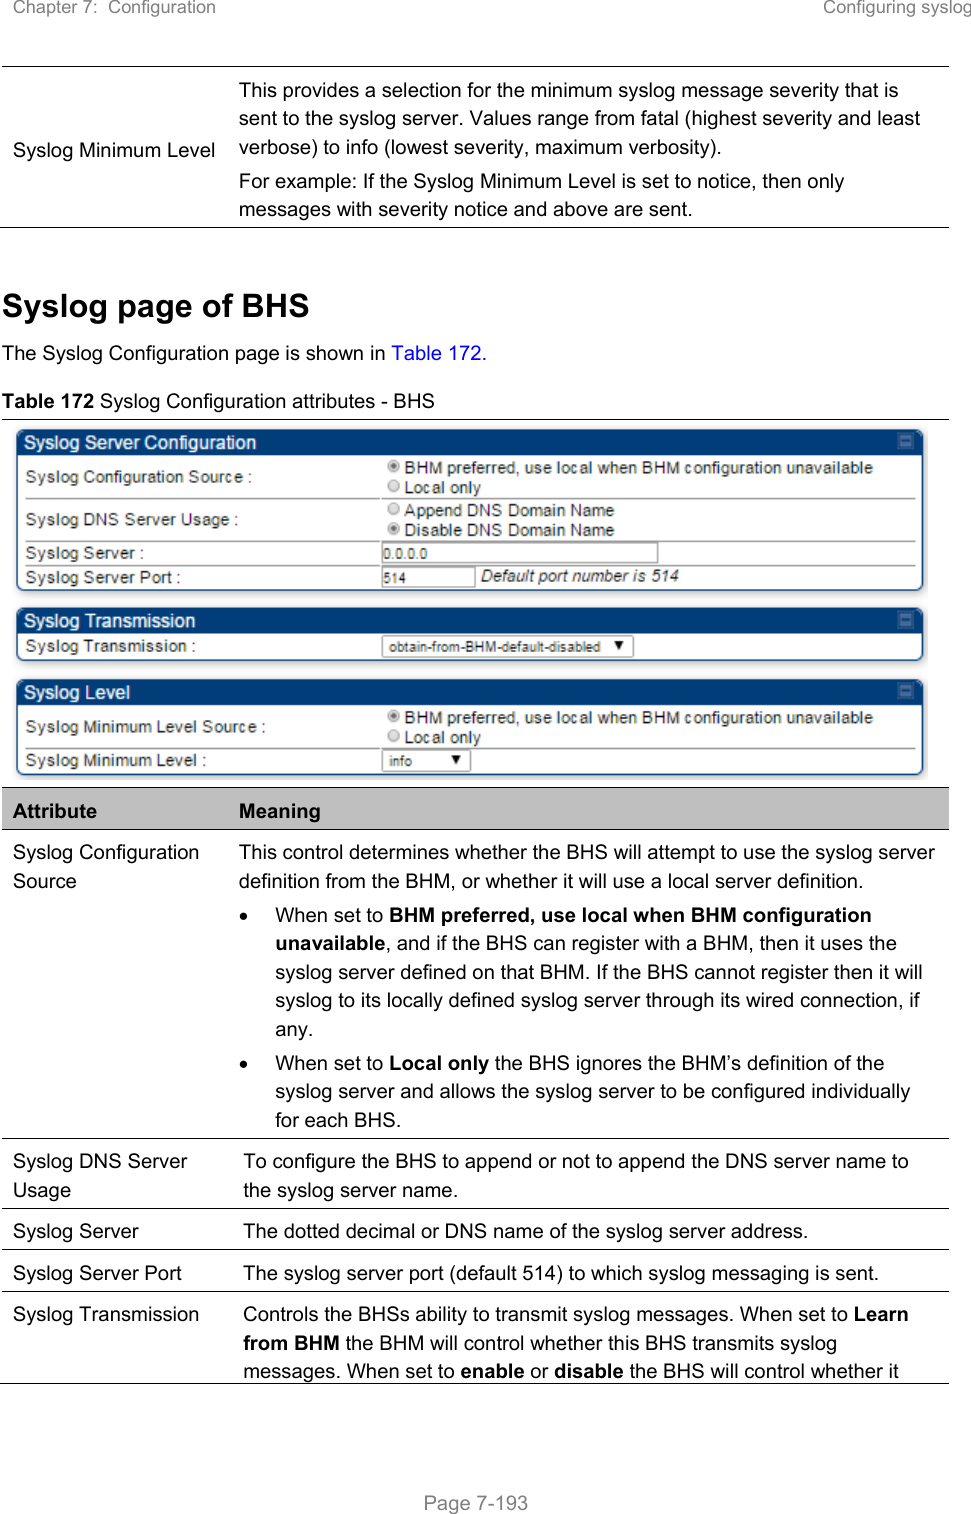 Chapter 7:  Configuration  Configuring syslog   Page 7-193 Syslog Minimum Level  This provides a selection for the minimum syslog message severity that is sent to the syslog server. Values range from fatal (highest severity and least verbose) to info (lowest severity, maximum verbosity). For example: If the Syslog Minimum Level is set to notice, then only messages with severity notice and above are sent.  Syslog page of BHS The Syslog Configuration page is shown in Table 172. Table 172 Syslog Configuration attributes - BHS  Attribute  Meaning Syslog Configuration Source This control determines whether the BHS will attempt to use the syslog server definition from the BHM, or whether it will use a local server definition.   When set to BHM preferred, use local when BHM configuration unavailable, and if the BHS can register with a BHM, then it uses the syslog server defined on that BHM. If the BHS cannot register then it will syslog to its locally defined syslog server through its wired connection, if any.   When set to Local only the BHS ignores the BHM’s definition of the syslog server and allows the syslog server to be configured individually for each BHS. Syslog DNS Server Usage  To configure the BHS to append or not to append the DNS server name to the syslog server name.  Syslog Server   The dotted decimal or DNS name of the syslog server address.  Syslog Server Port   The syslog server port (default 514) to which syslog messaging is sent.  Syslog Transmission  Controls the BHSs ability to transmit syslog messages. When set to Learn from BHM the BHM will control whether this BHS transmits syslog messages. When set to enable or disable the BHS will control whether it 